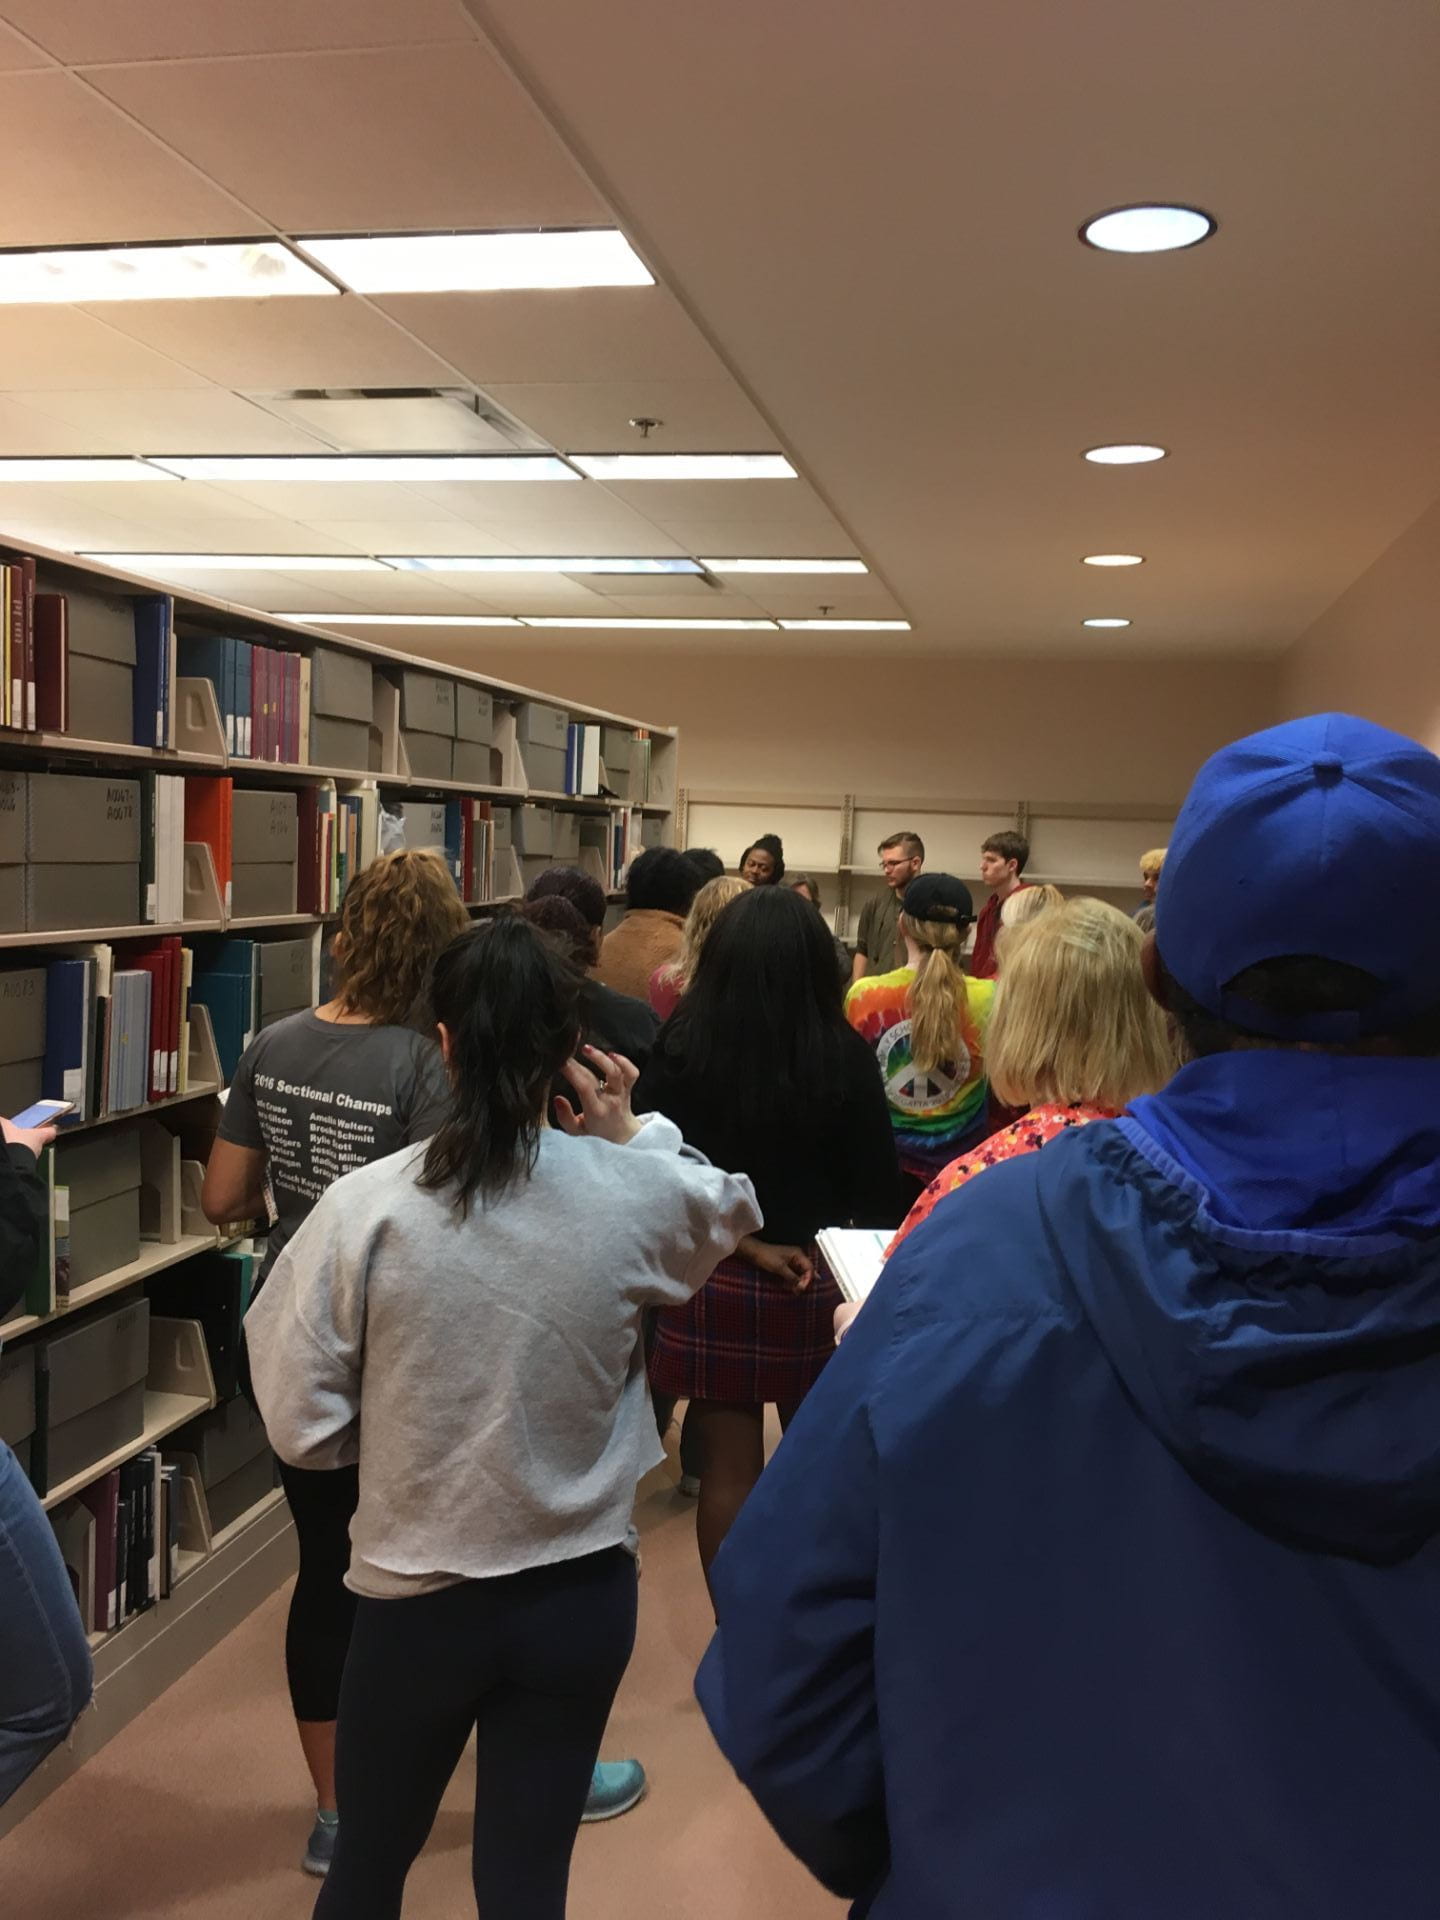 Students walk through the university's archives.